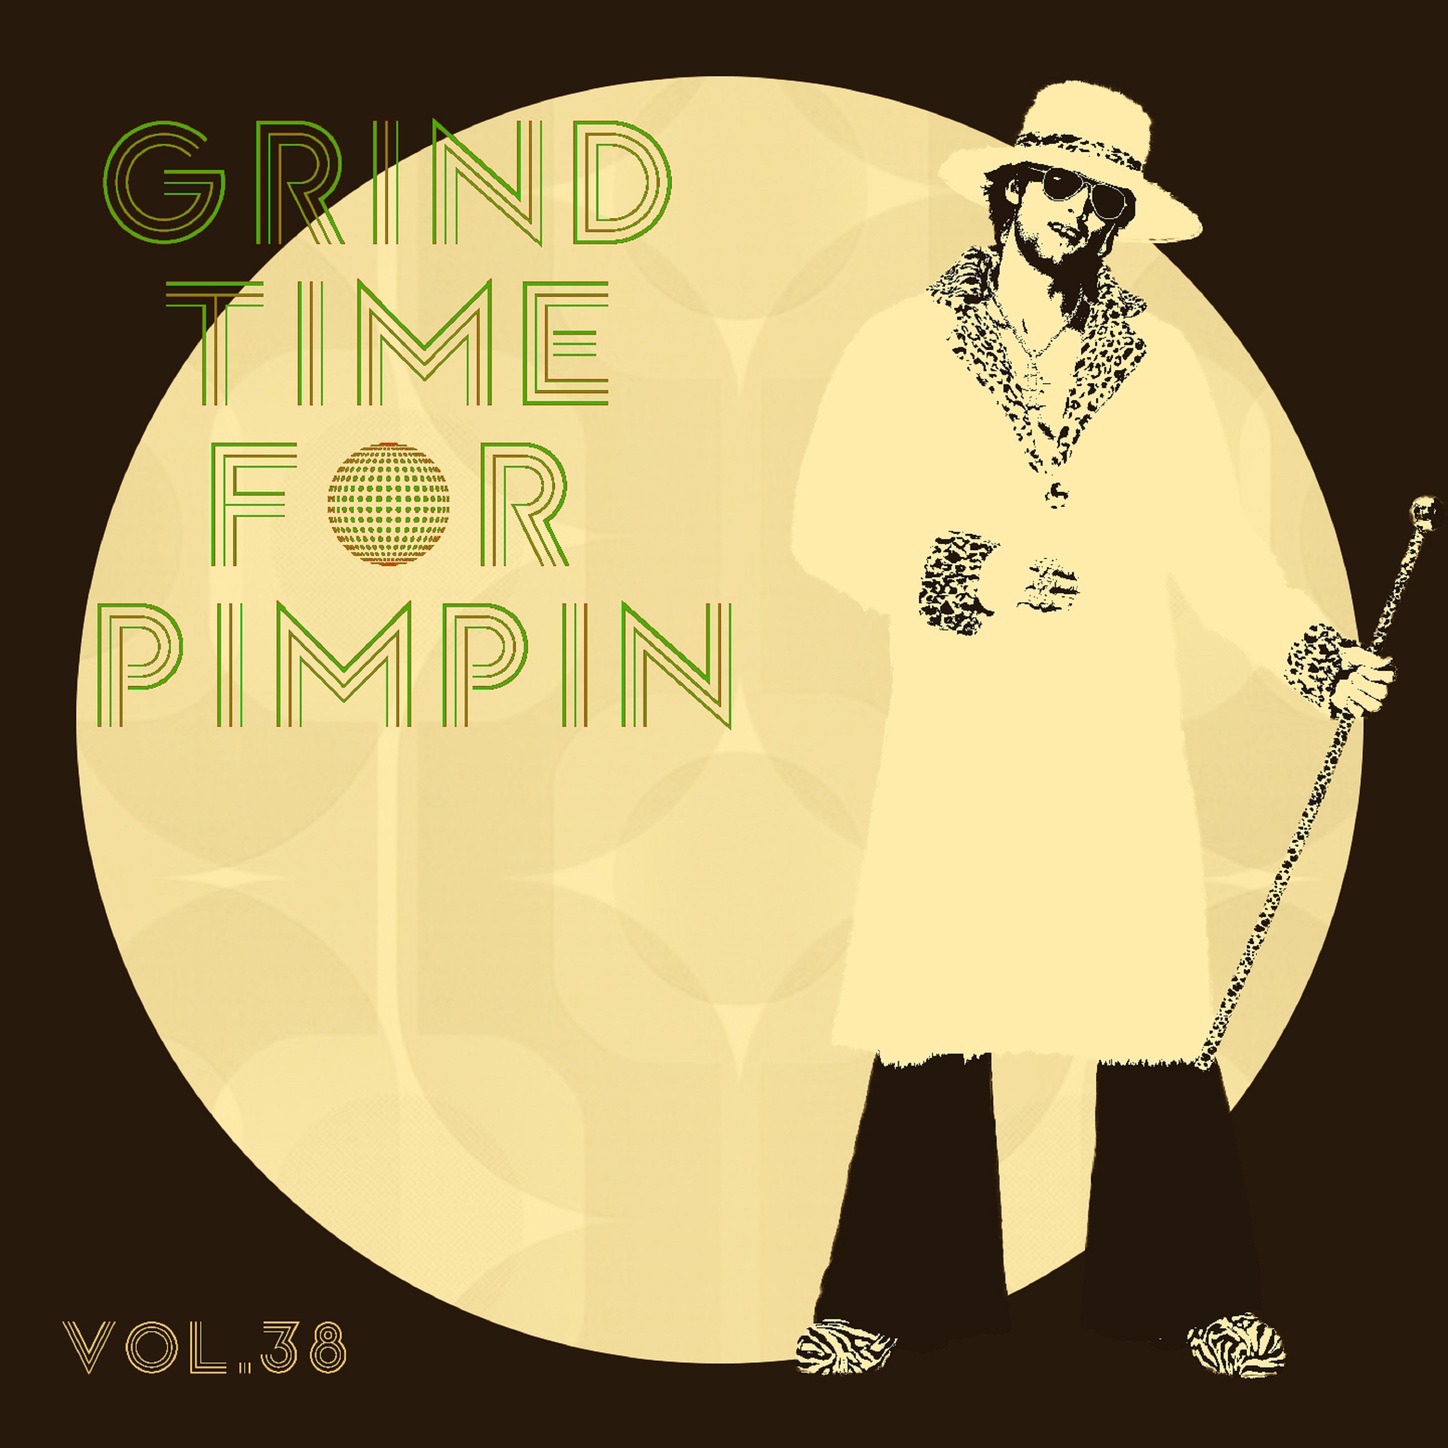 Grind Time For ****in Vol, 38